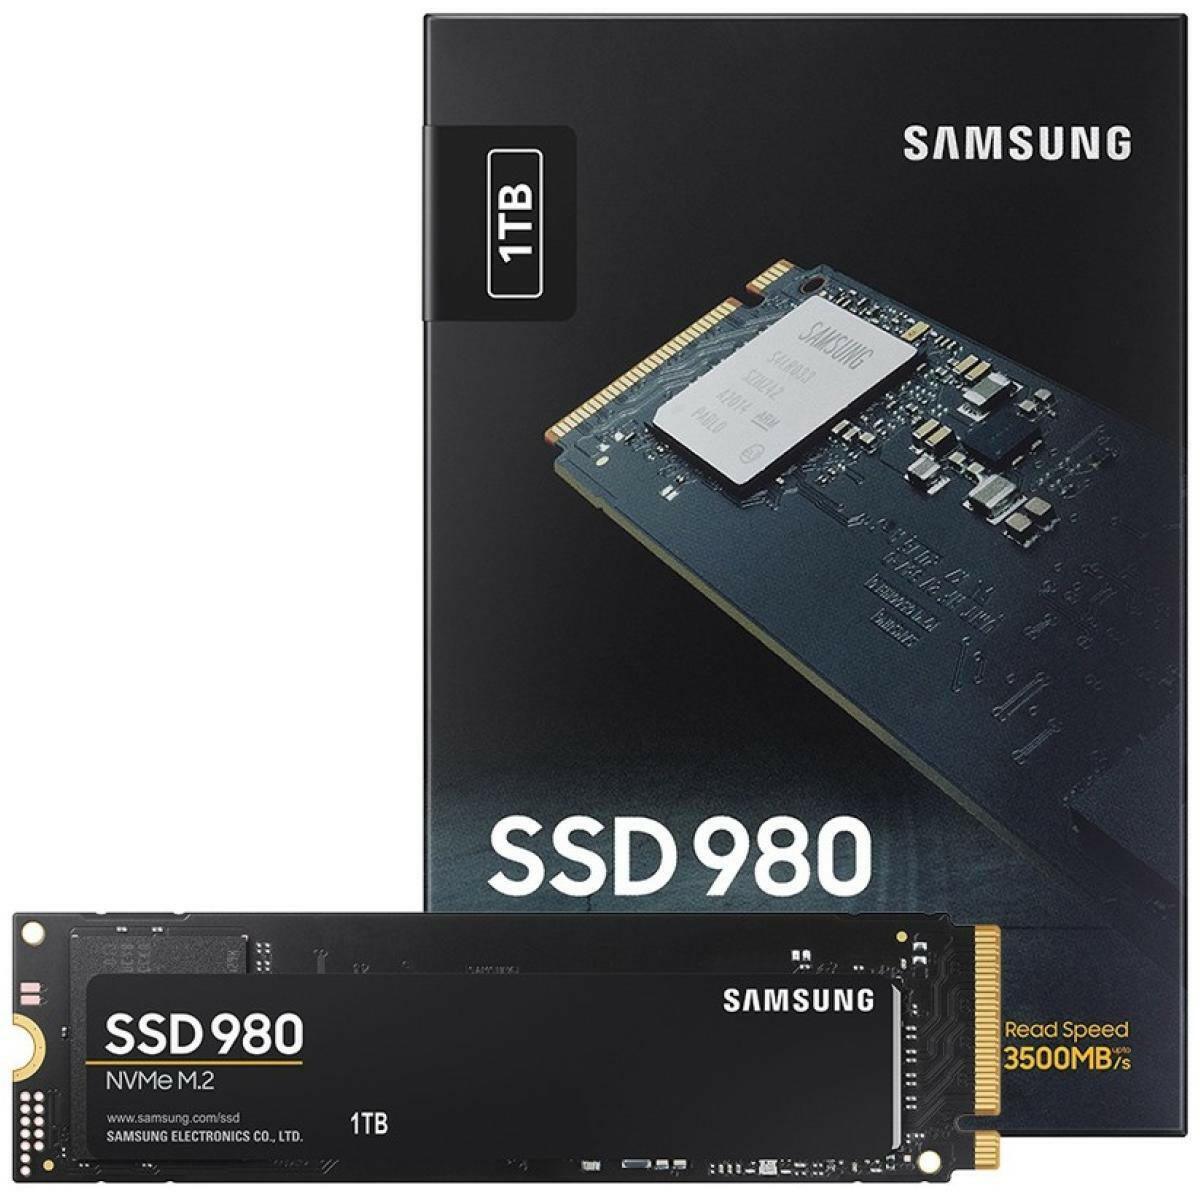 SAMSUNG Solid State Drive SAMSUNG 980 SSD 1TB PCIe3.0 M.2 NVMe Read/Write Up To 3,500/3,000 MB/s